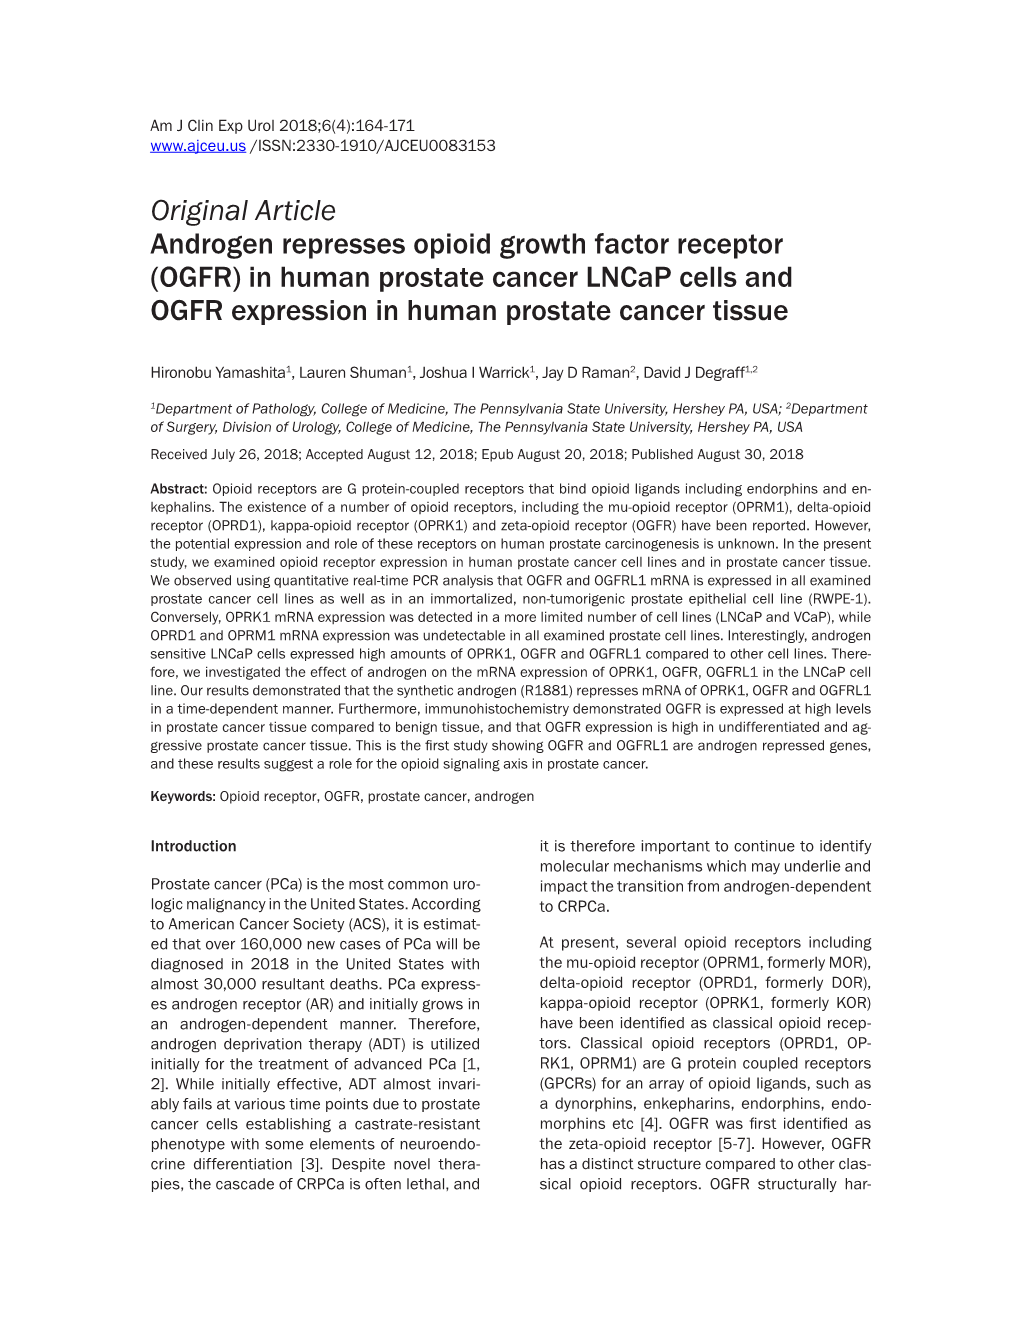 In Human Prostate Cancer Lncap Cells and OGFR Expression in Human Prostate Cancer Tissue